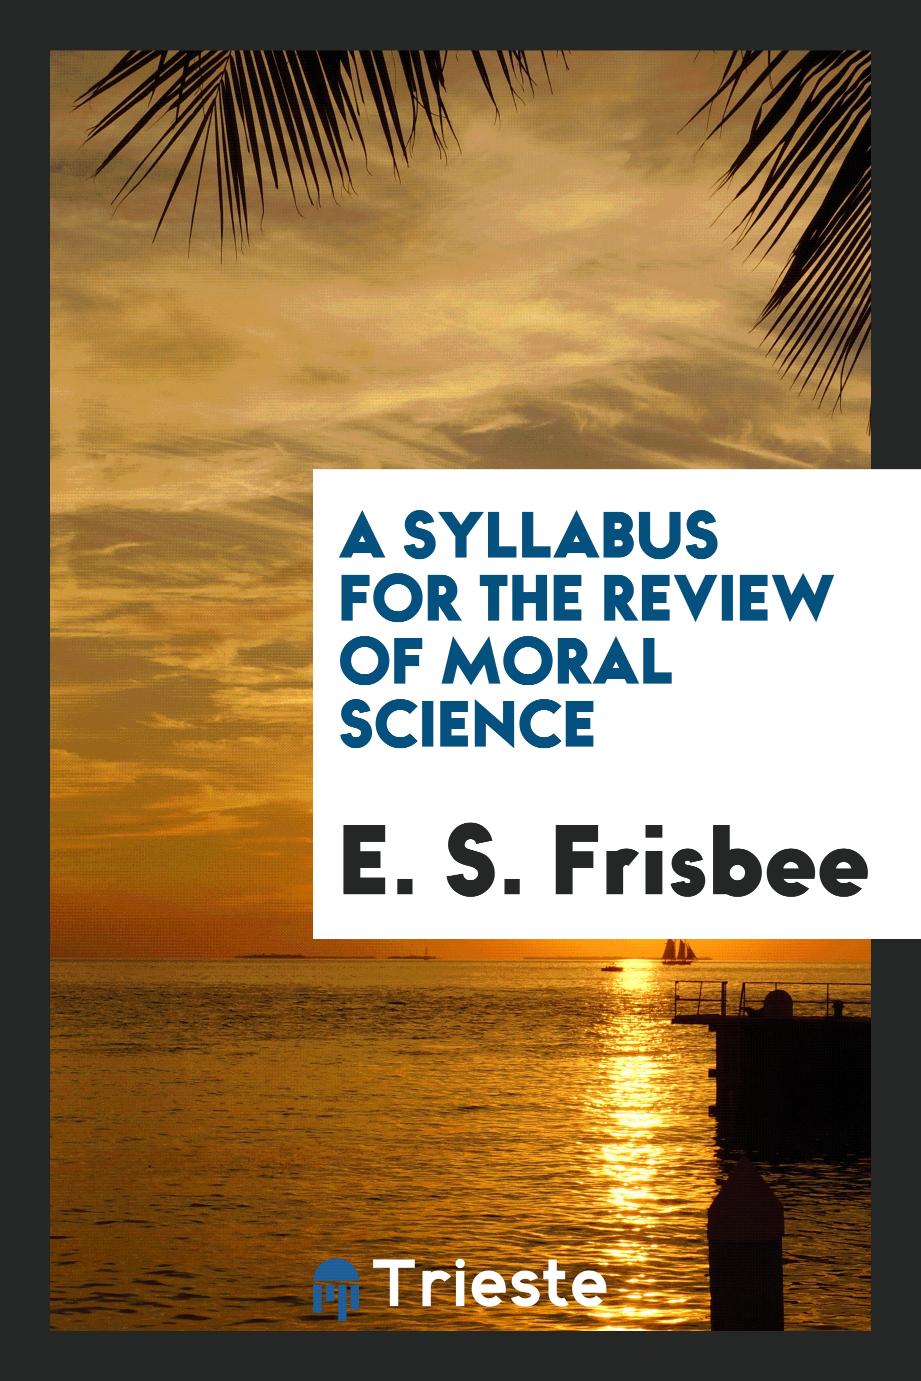 A Syllabus for the Review of Moral Science